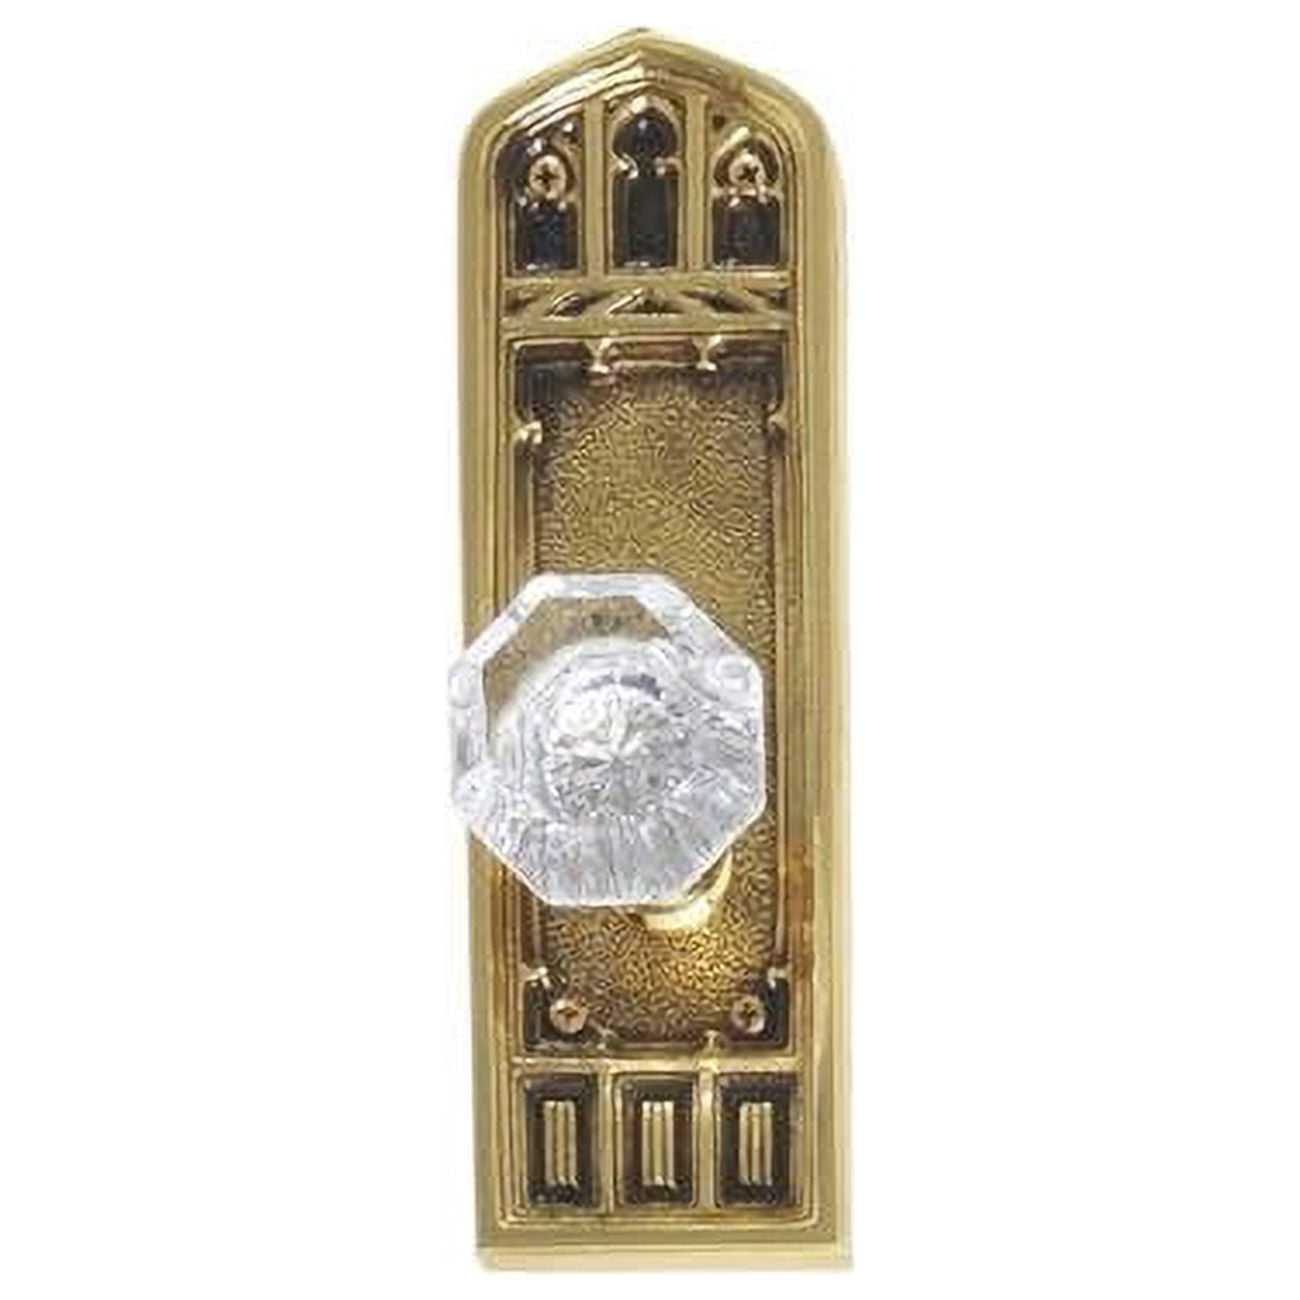 3.37 X 18 In. Oxford Privacy Door Set Aged Brass